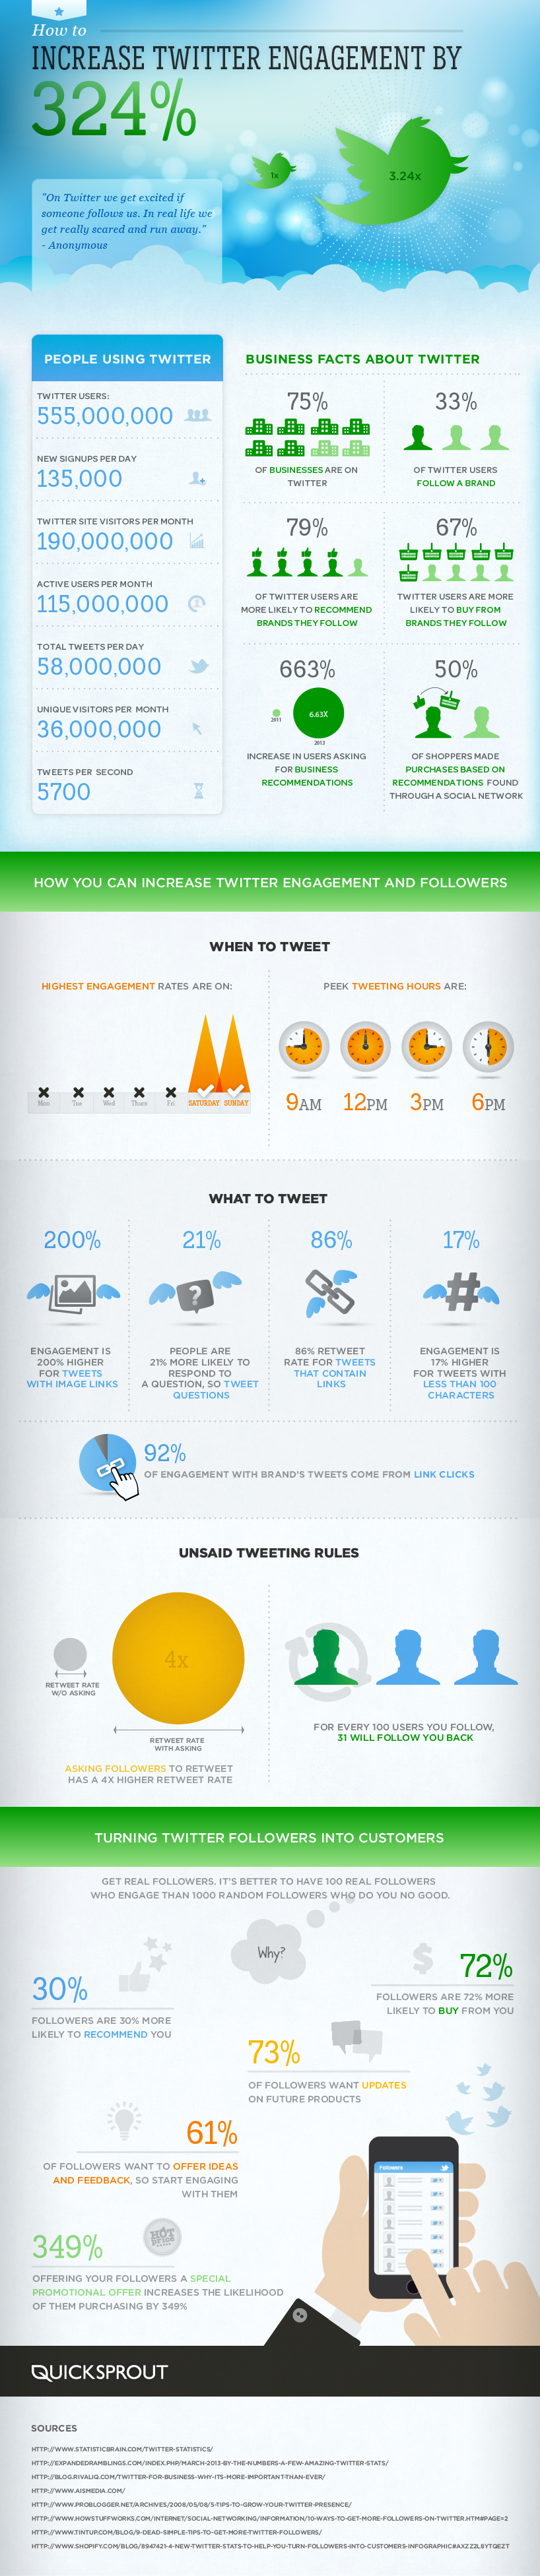 How to Increase Your Twitter Engagement by 324%